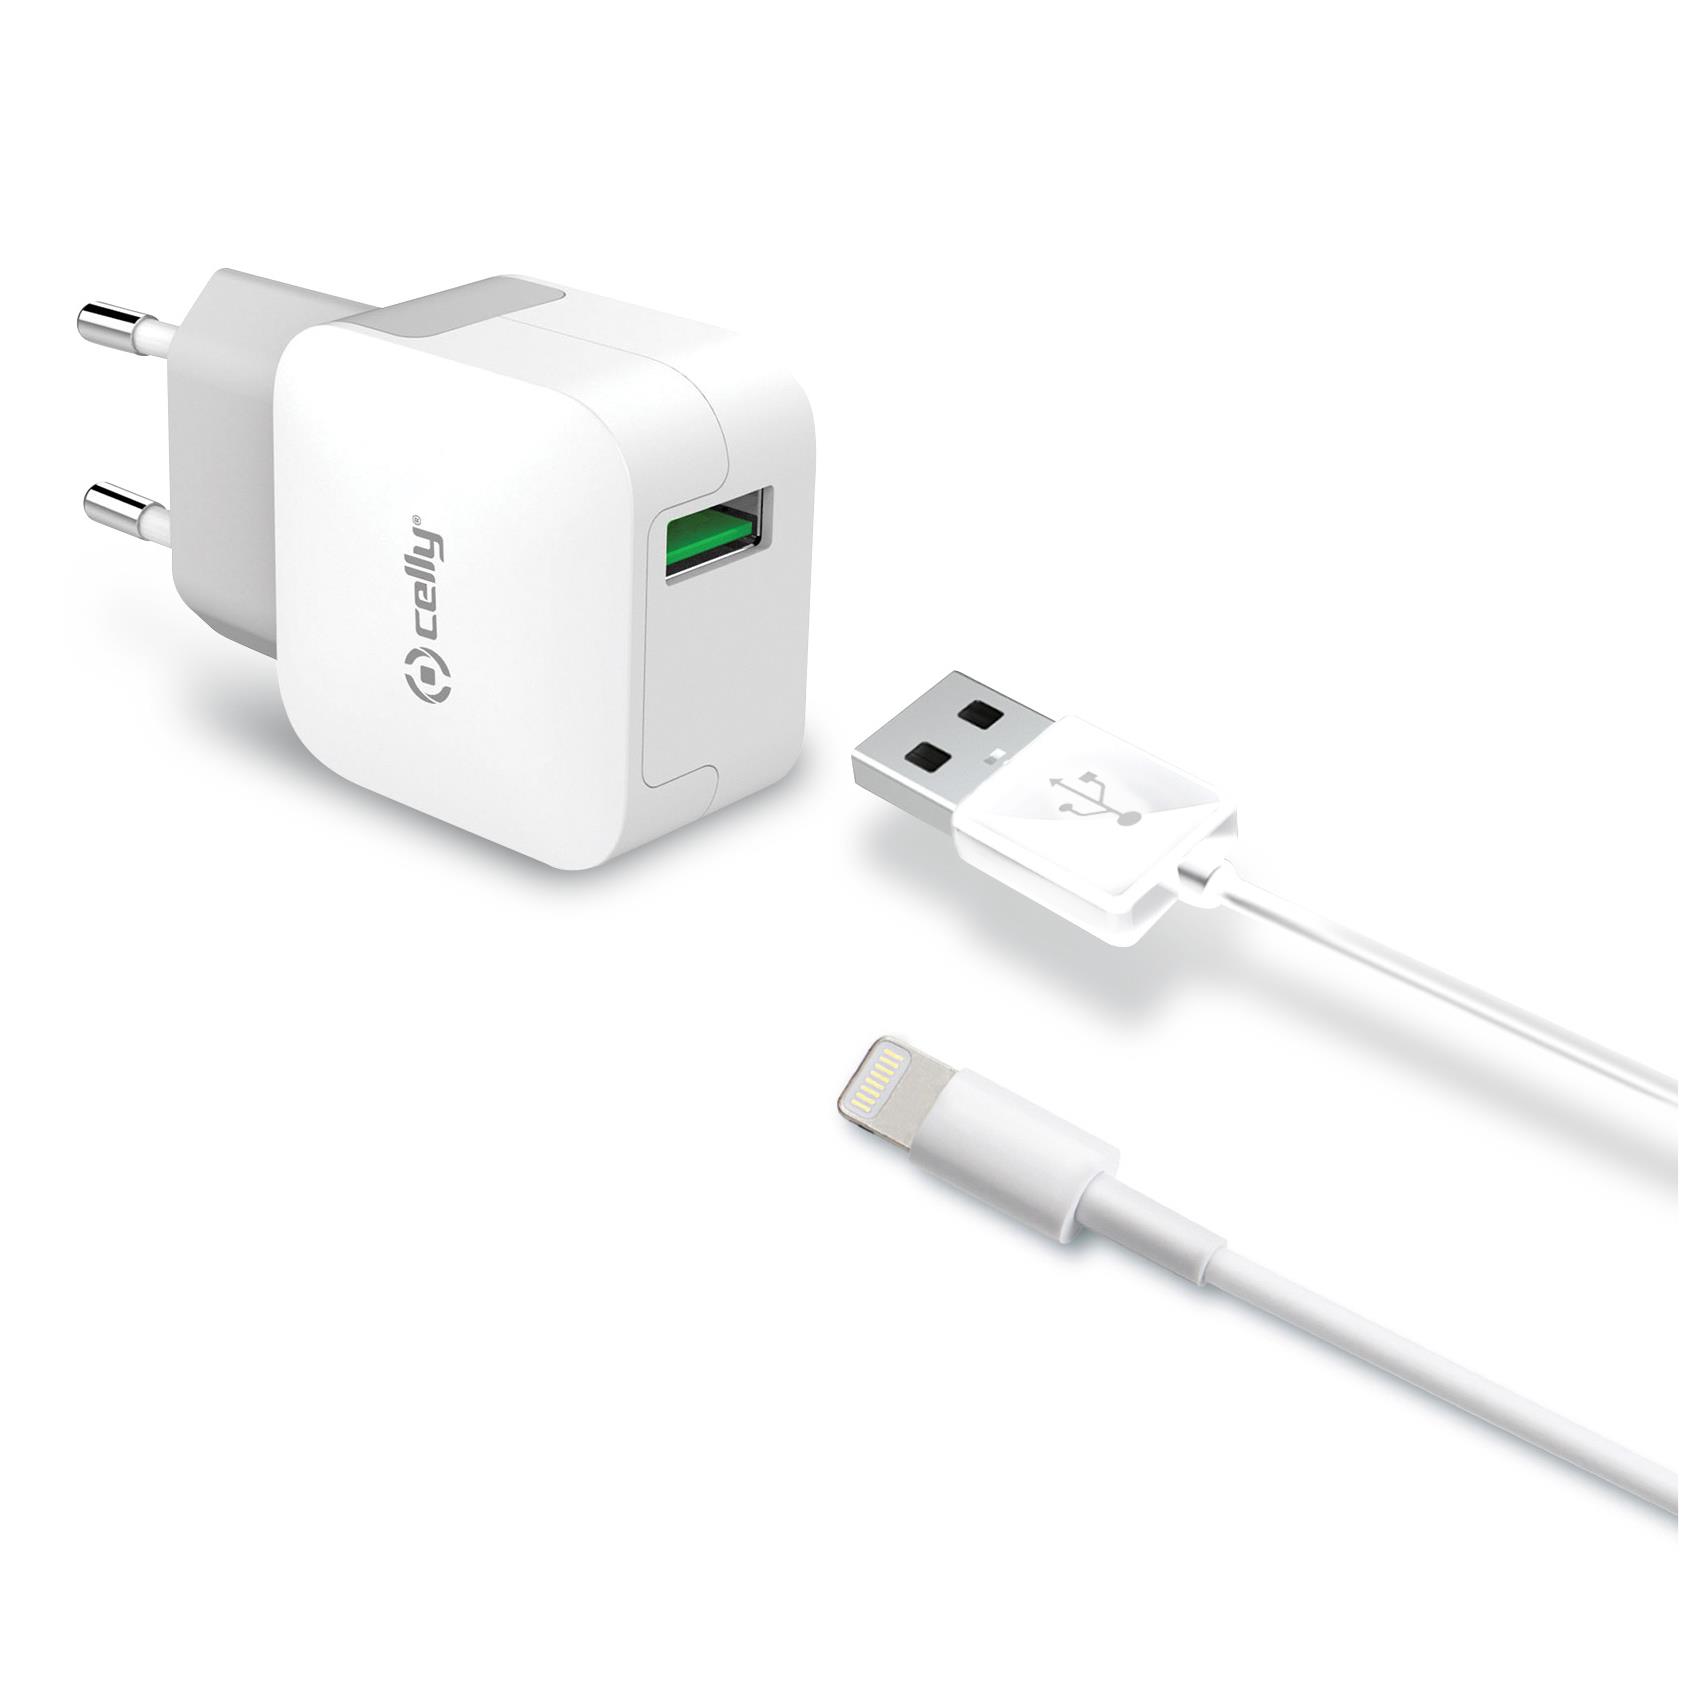 TCUSBLIGHT - Wall Charger USB-A+USB-A to Lightning Cable 12W [TURBO]